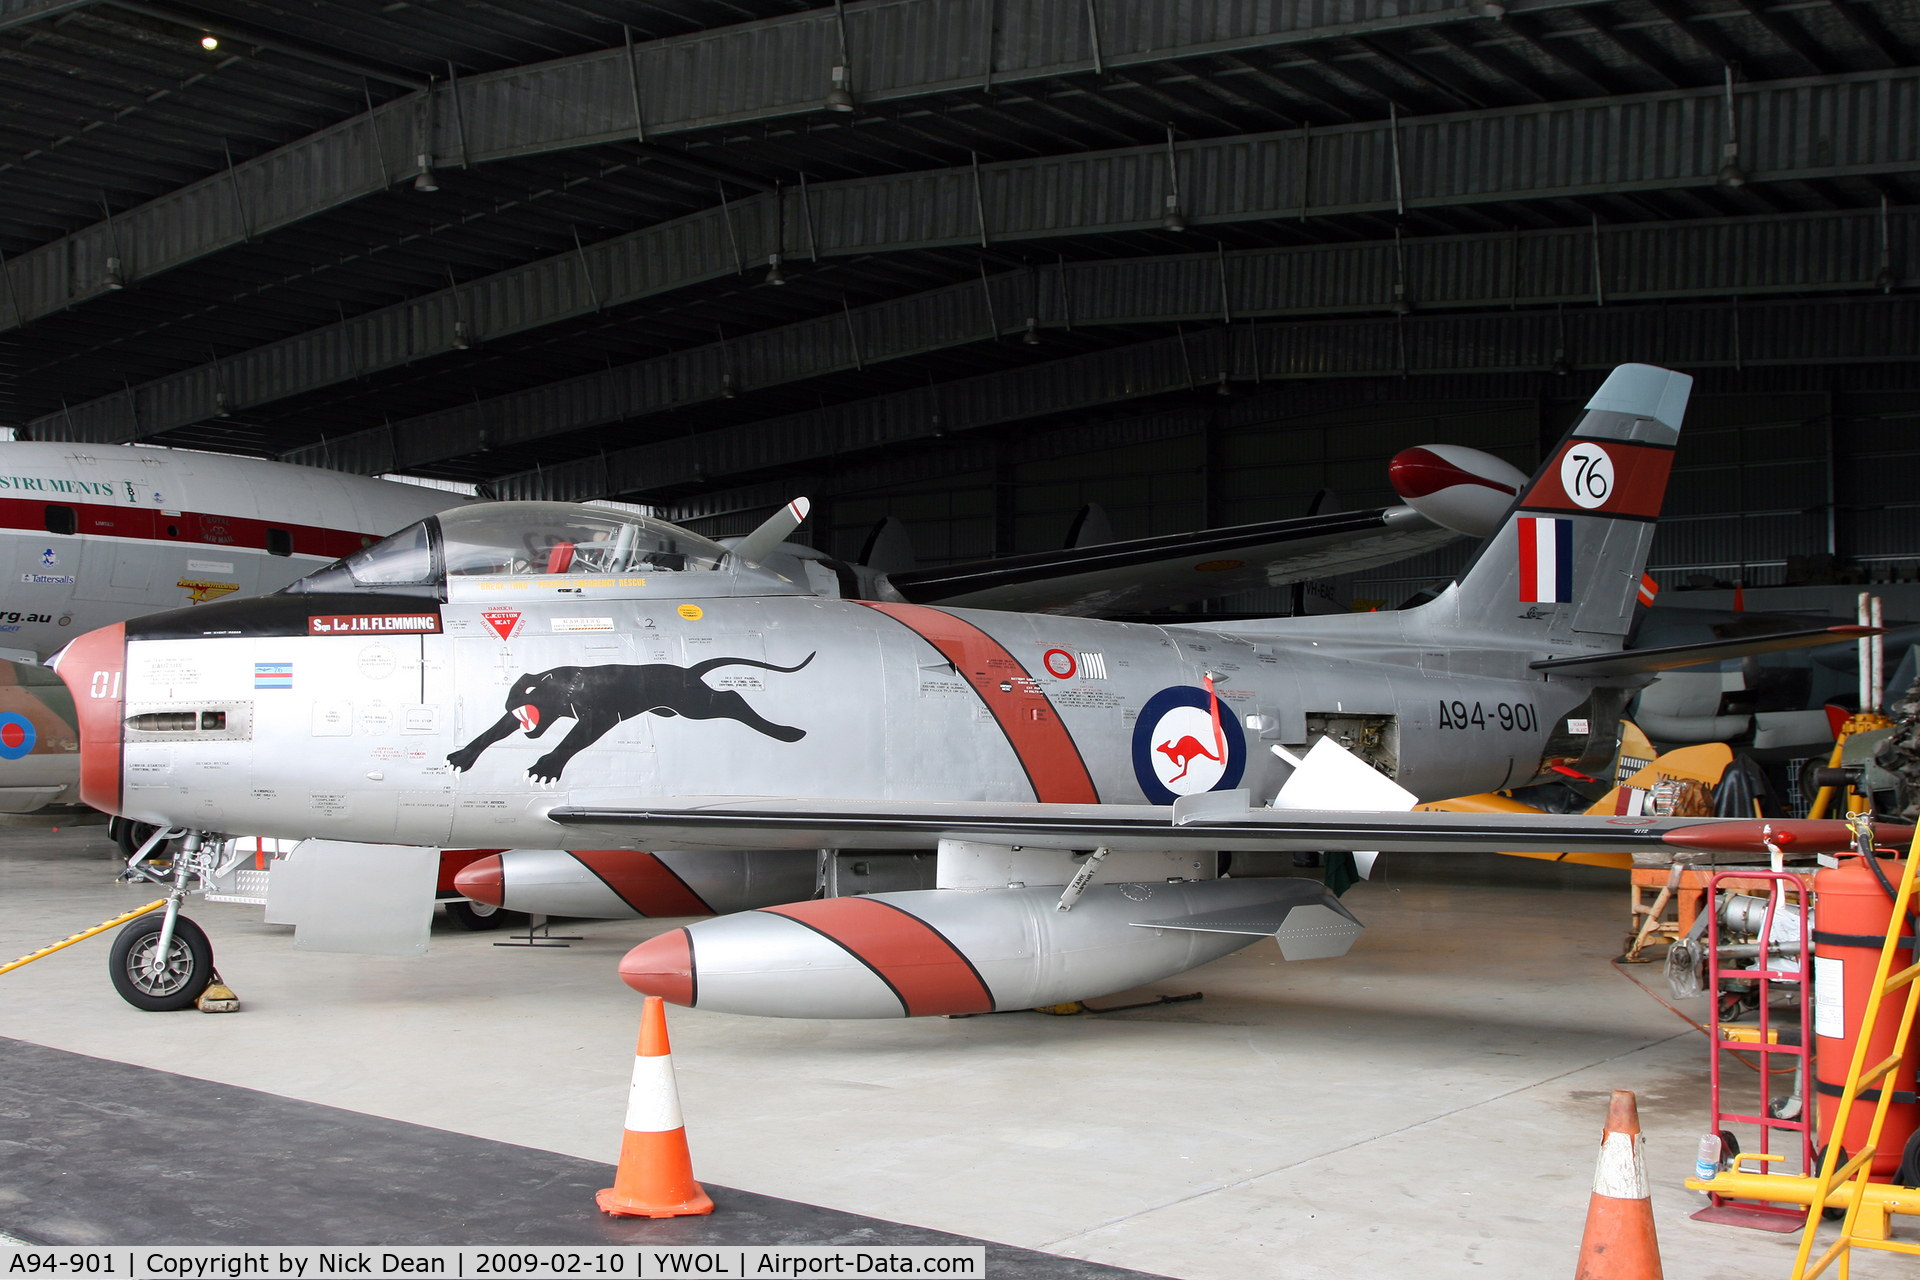 A94-901, 1954 Commonwealth CA-27 Sabre Mk.30 C/N CA27-1, YWOL (HARS Wollongong a collection well worth visiting)